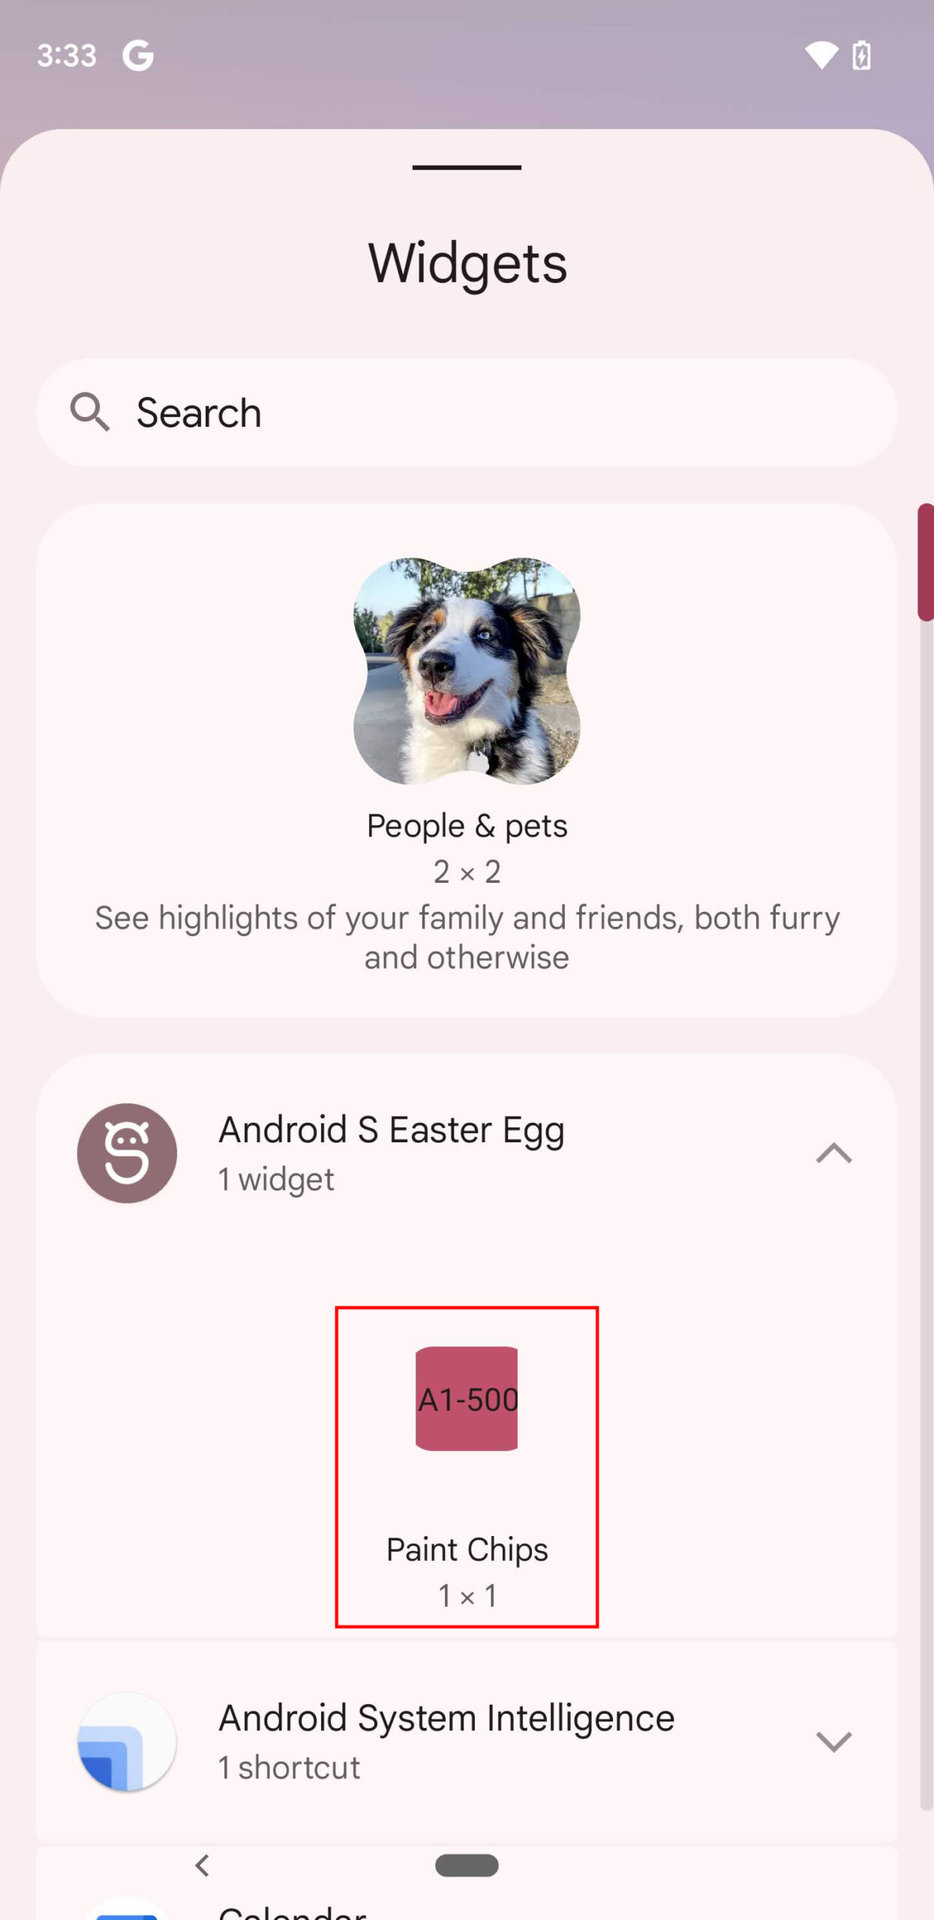 Android S Easter Egg widget 3